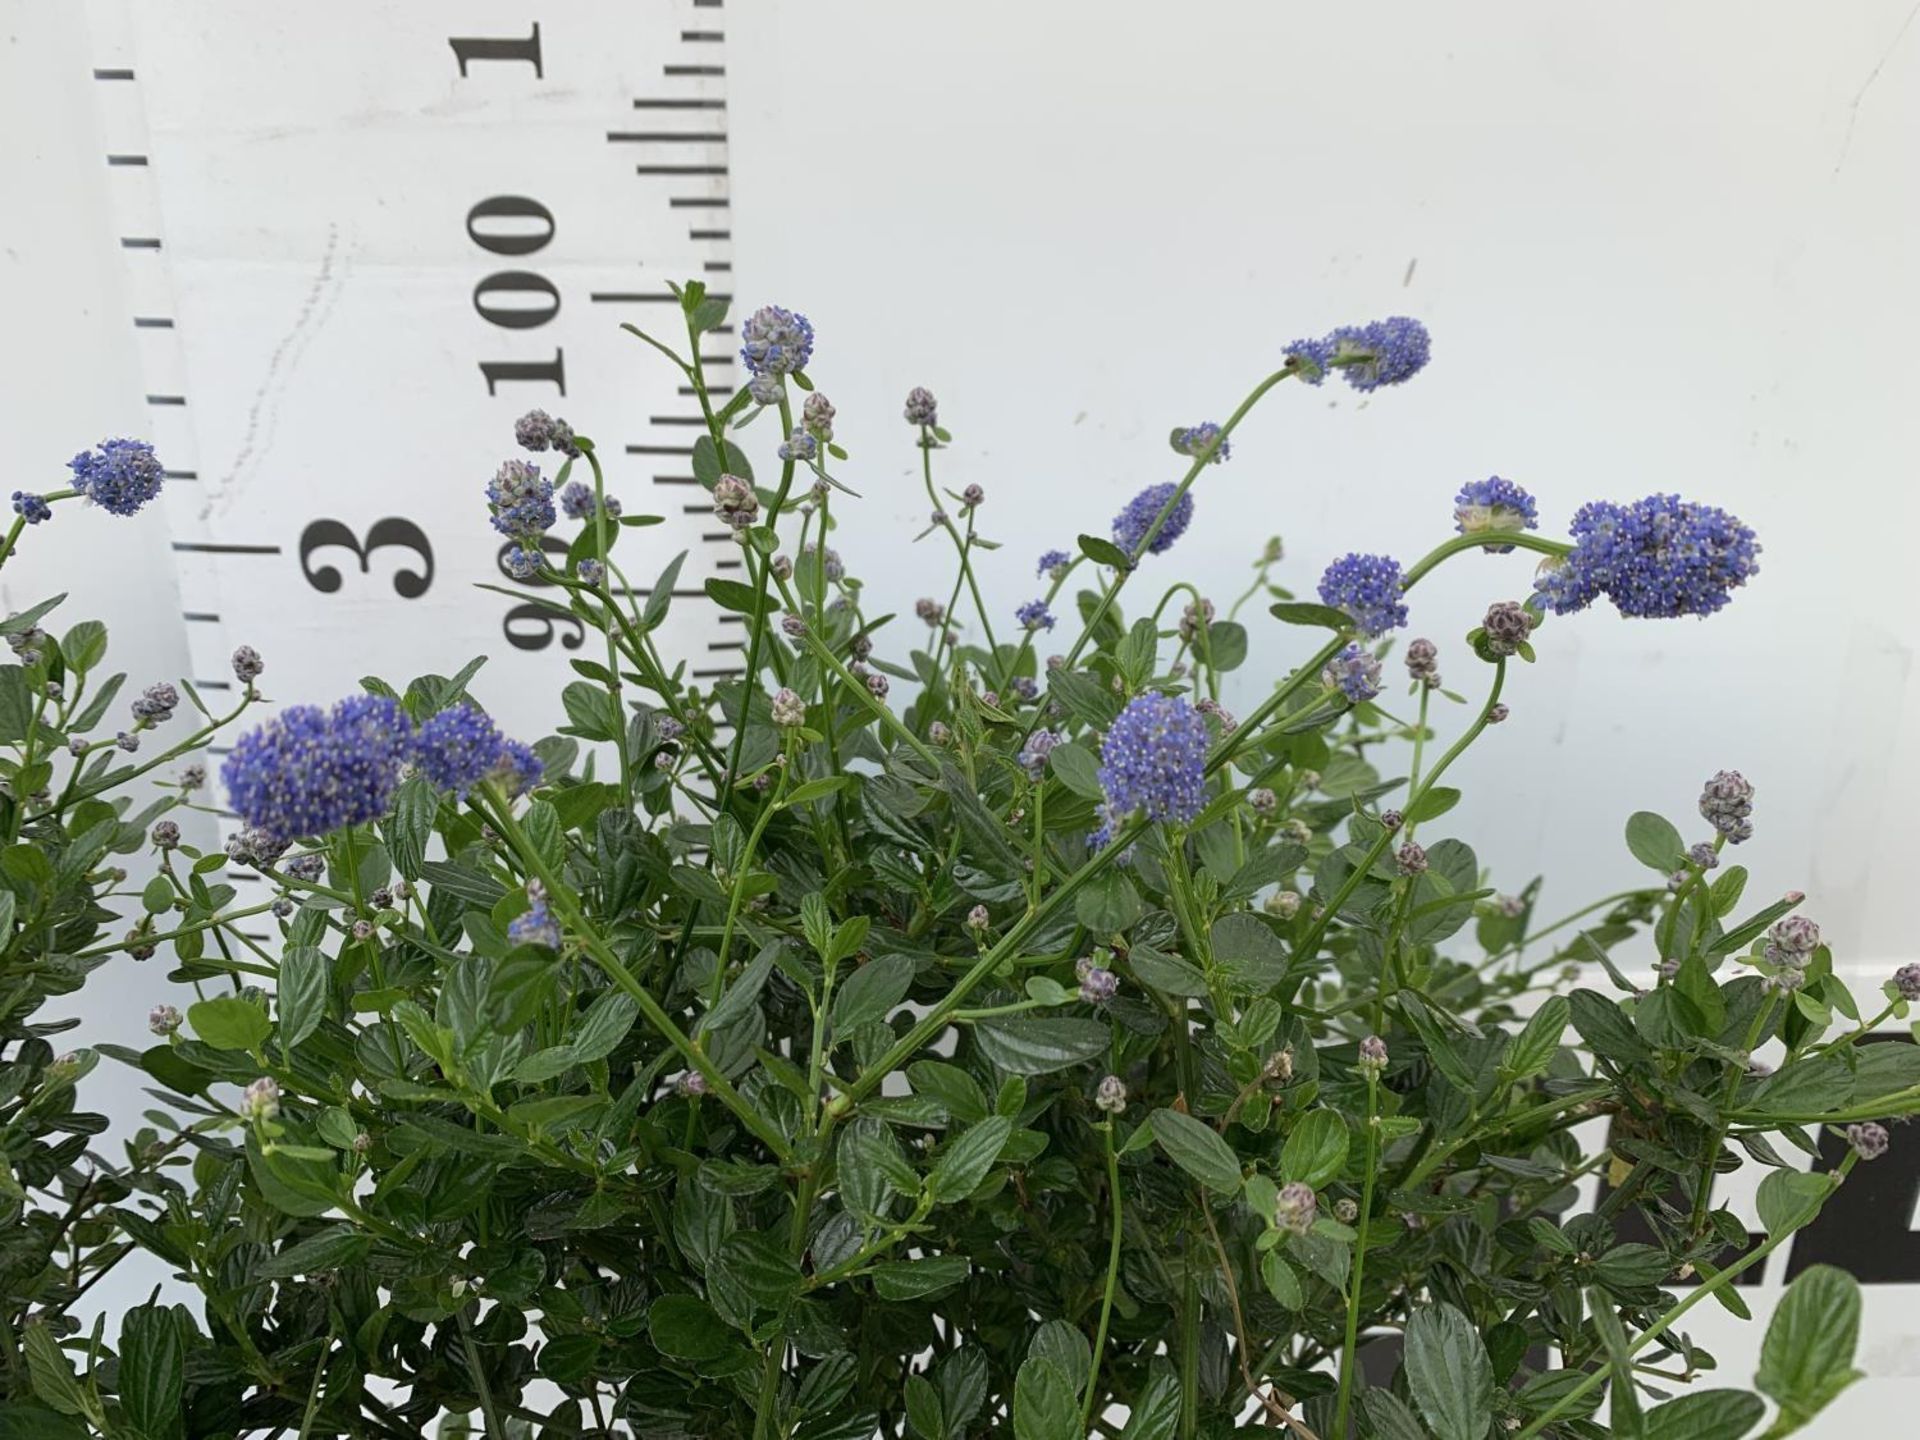 TWO CEANOTHUS IMPRESSUS STANDARD TREES 'VICTORIA' IN FLOWER APPROX 110CM IN HEIGHT IN 3LTR POTS PLUS - Image 6 of 10